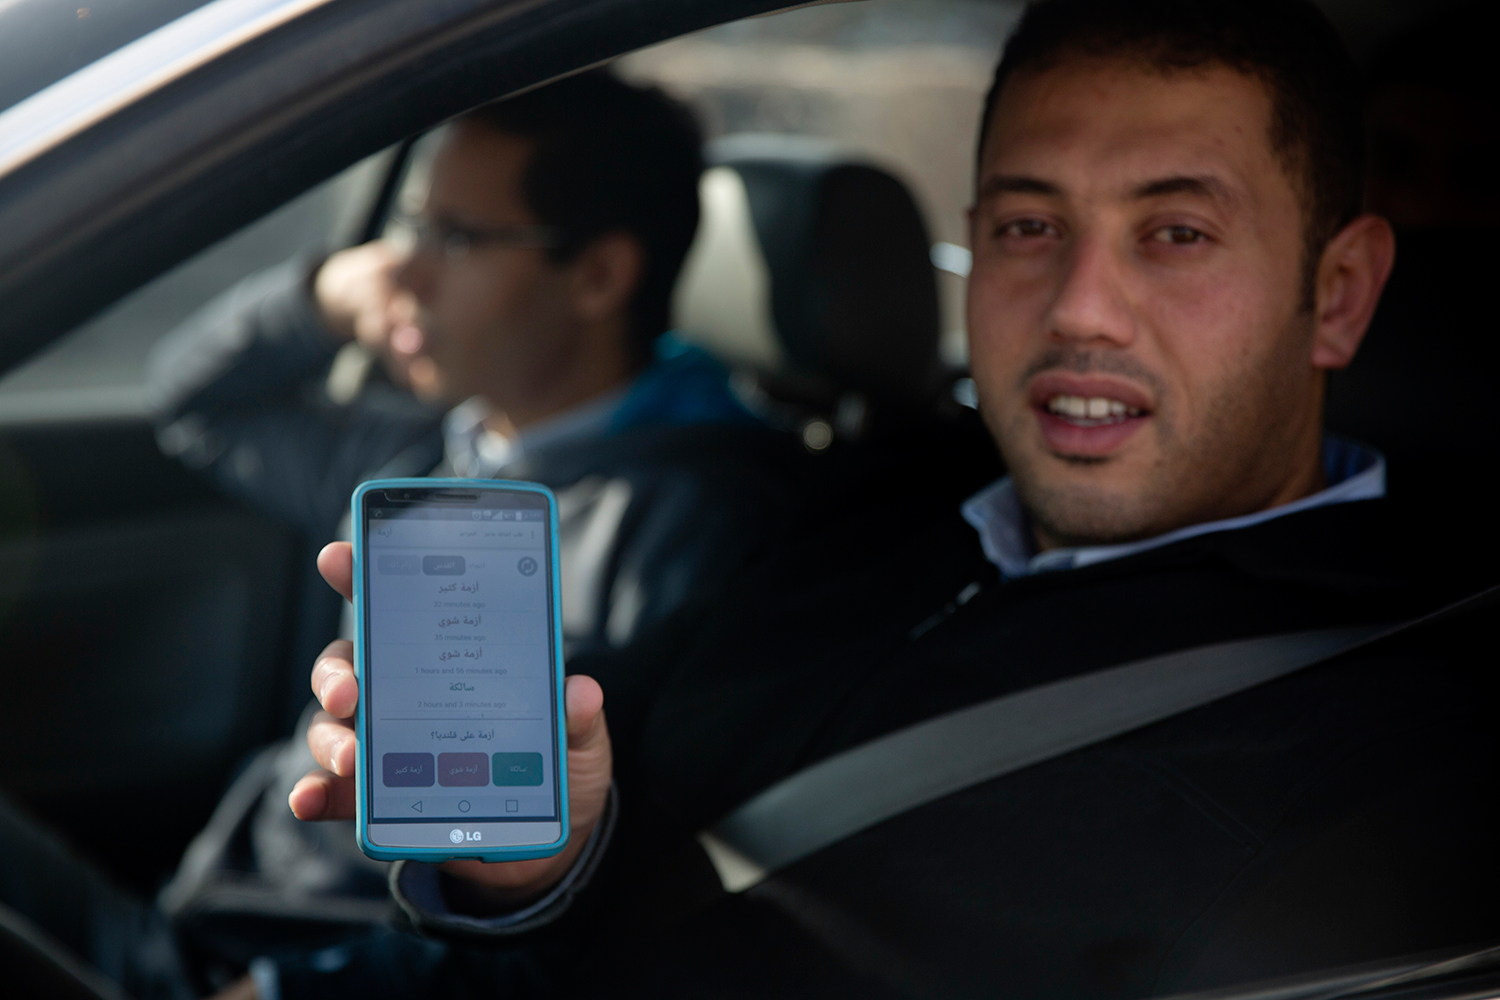 The apps that help Palestinians avoid Israeli checkpoints